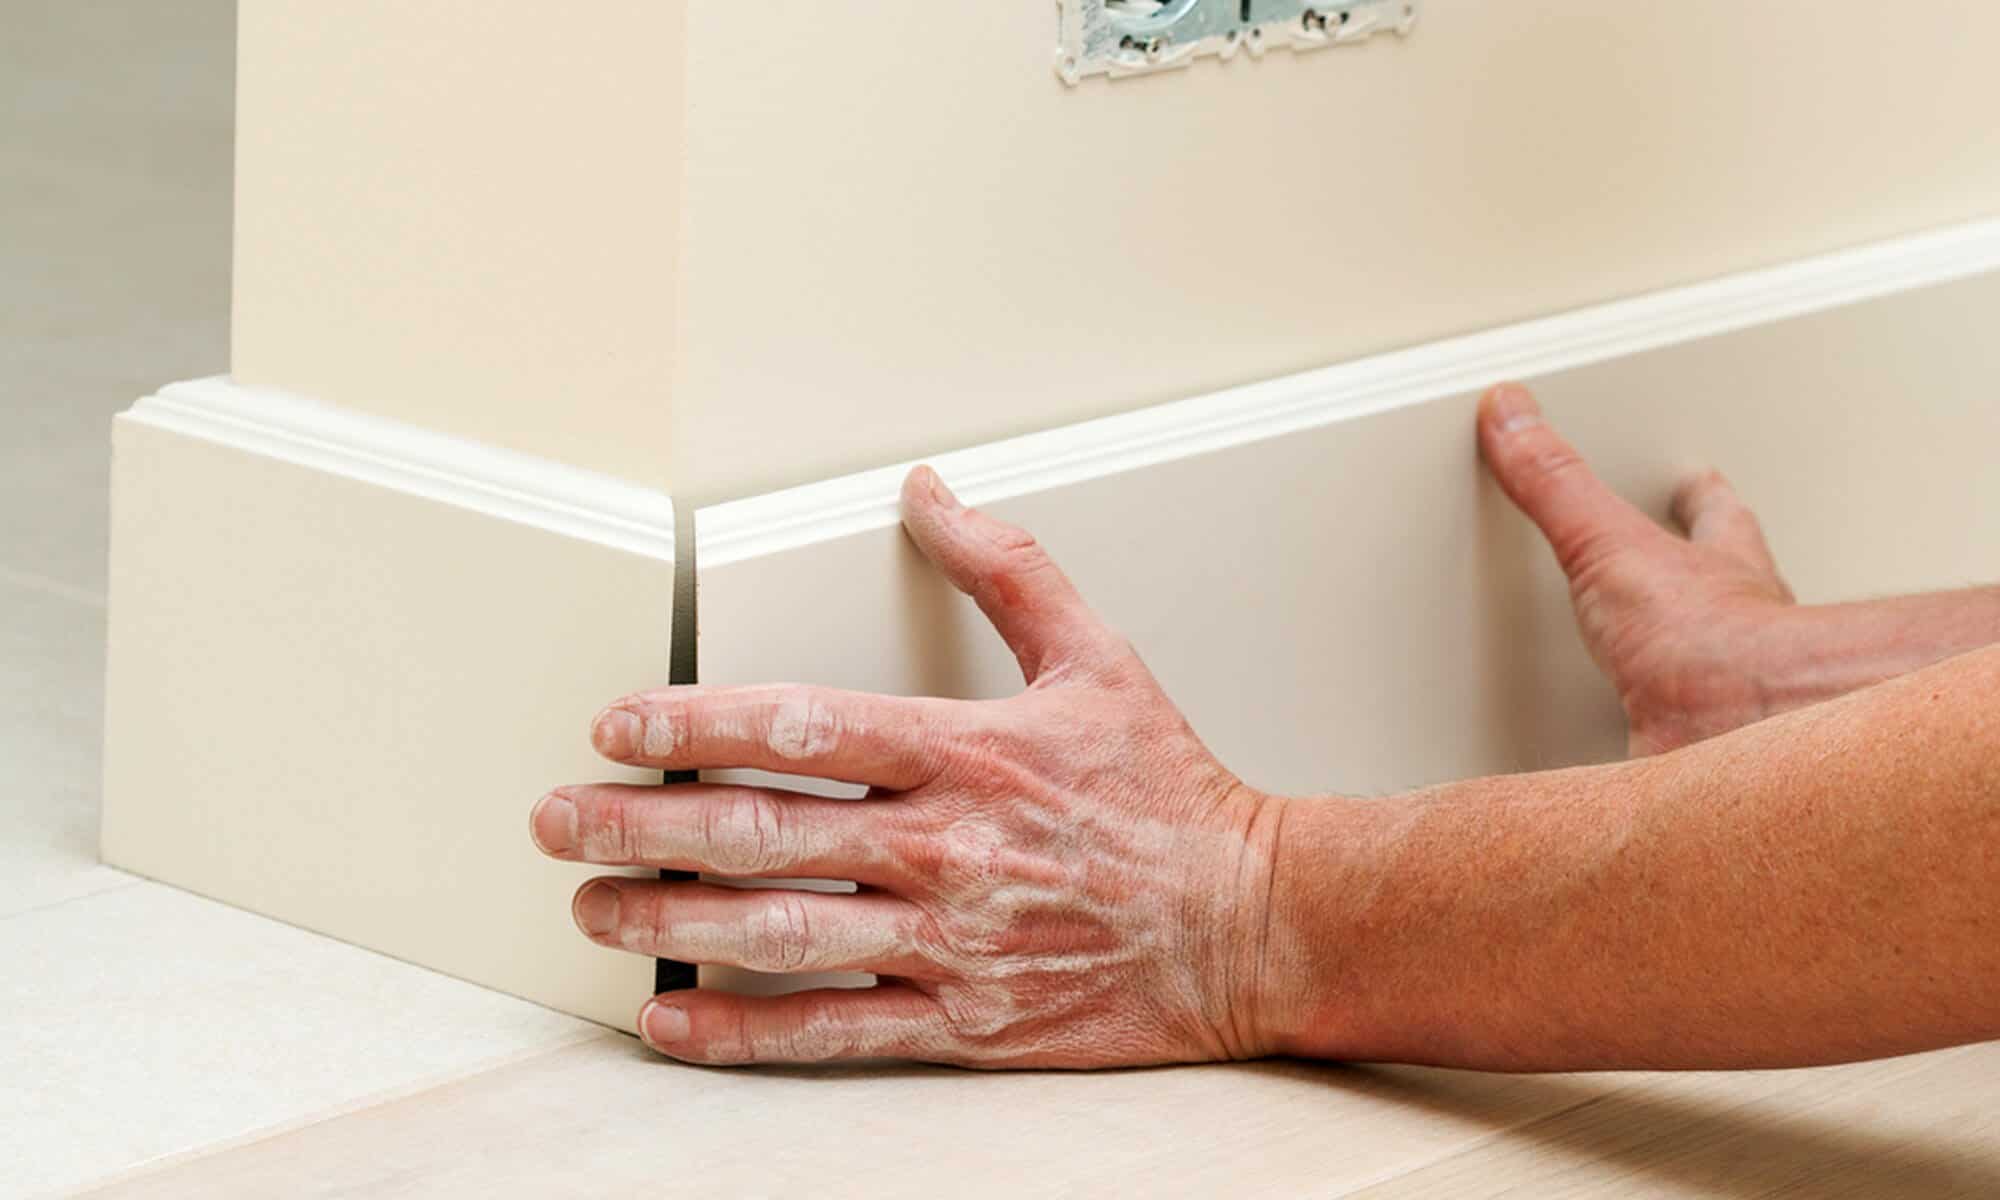 How to install Baseboard